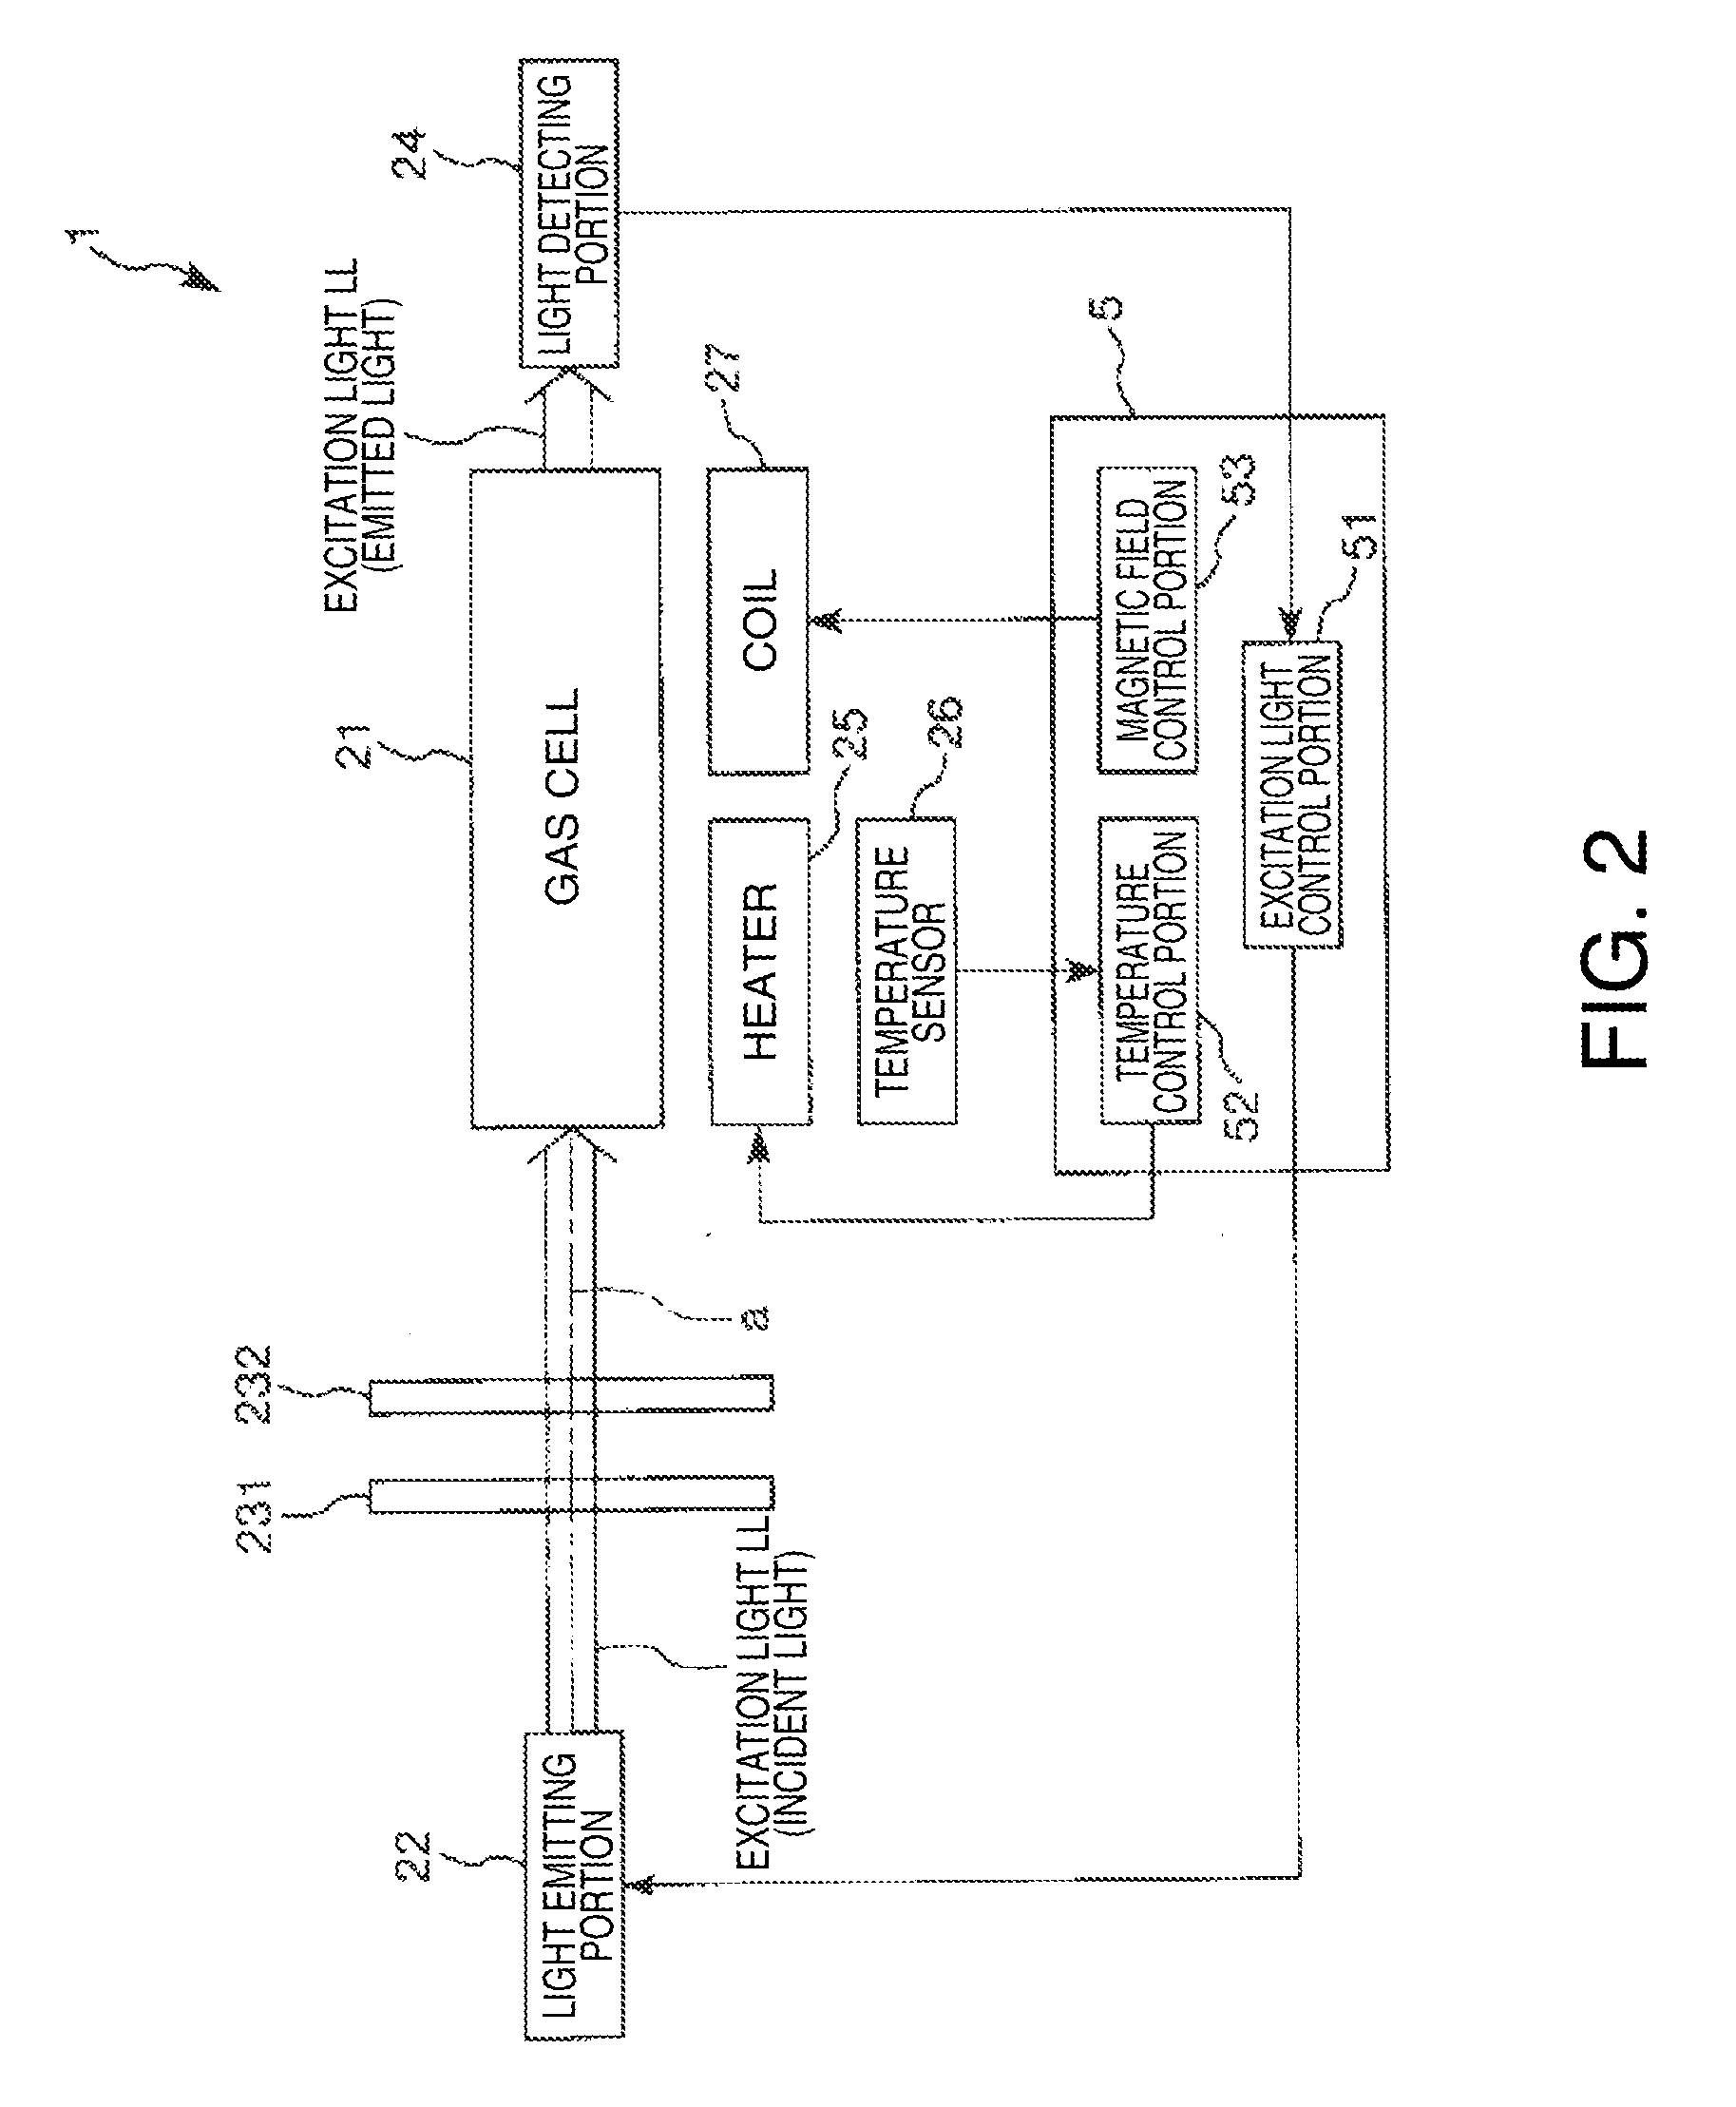 Quantum interference device, atomic oscillator, and moving object